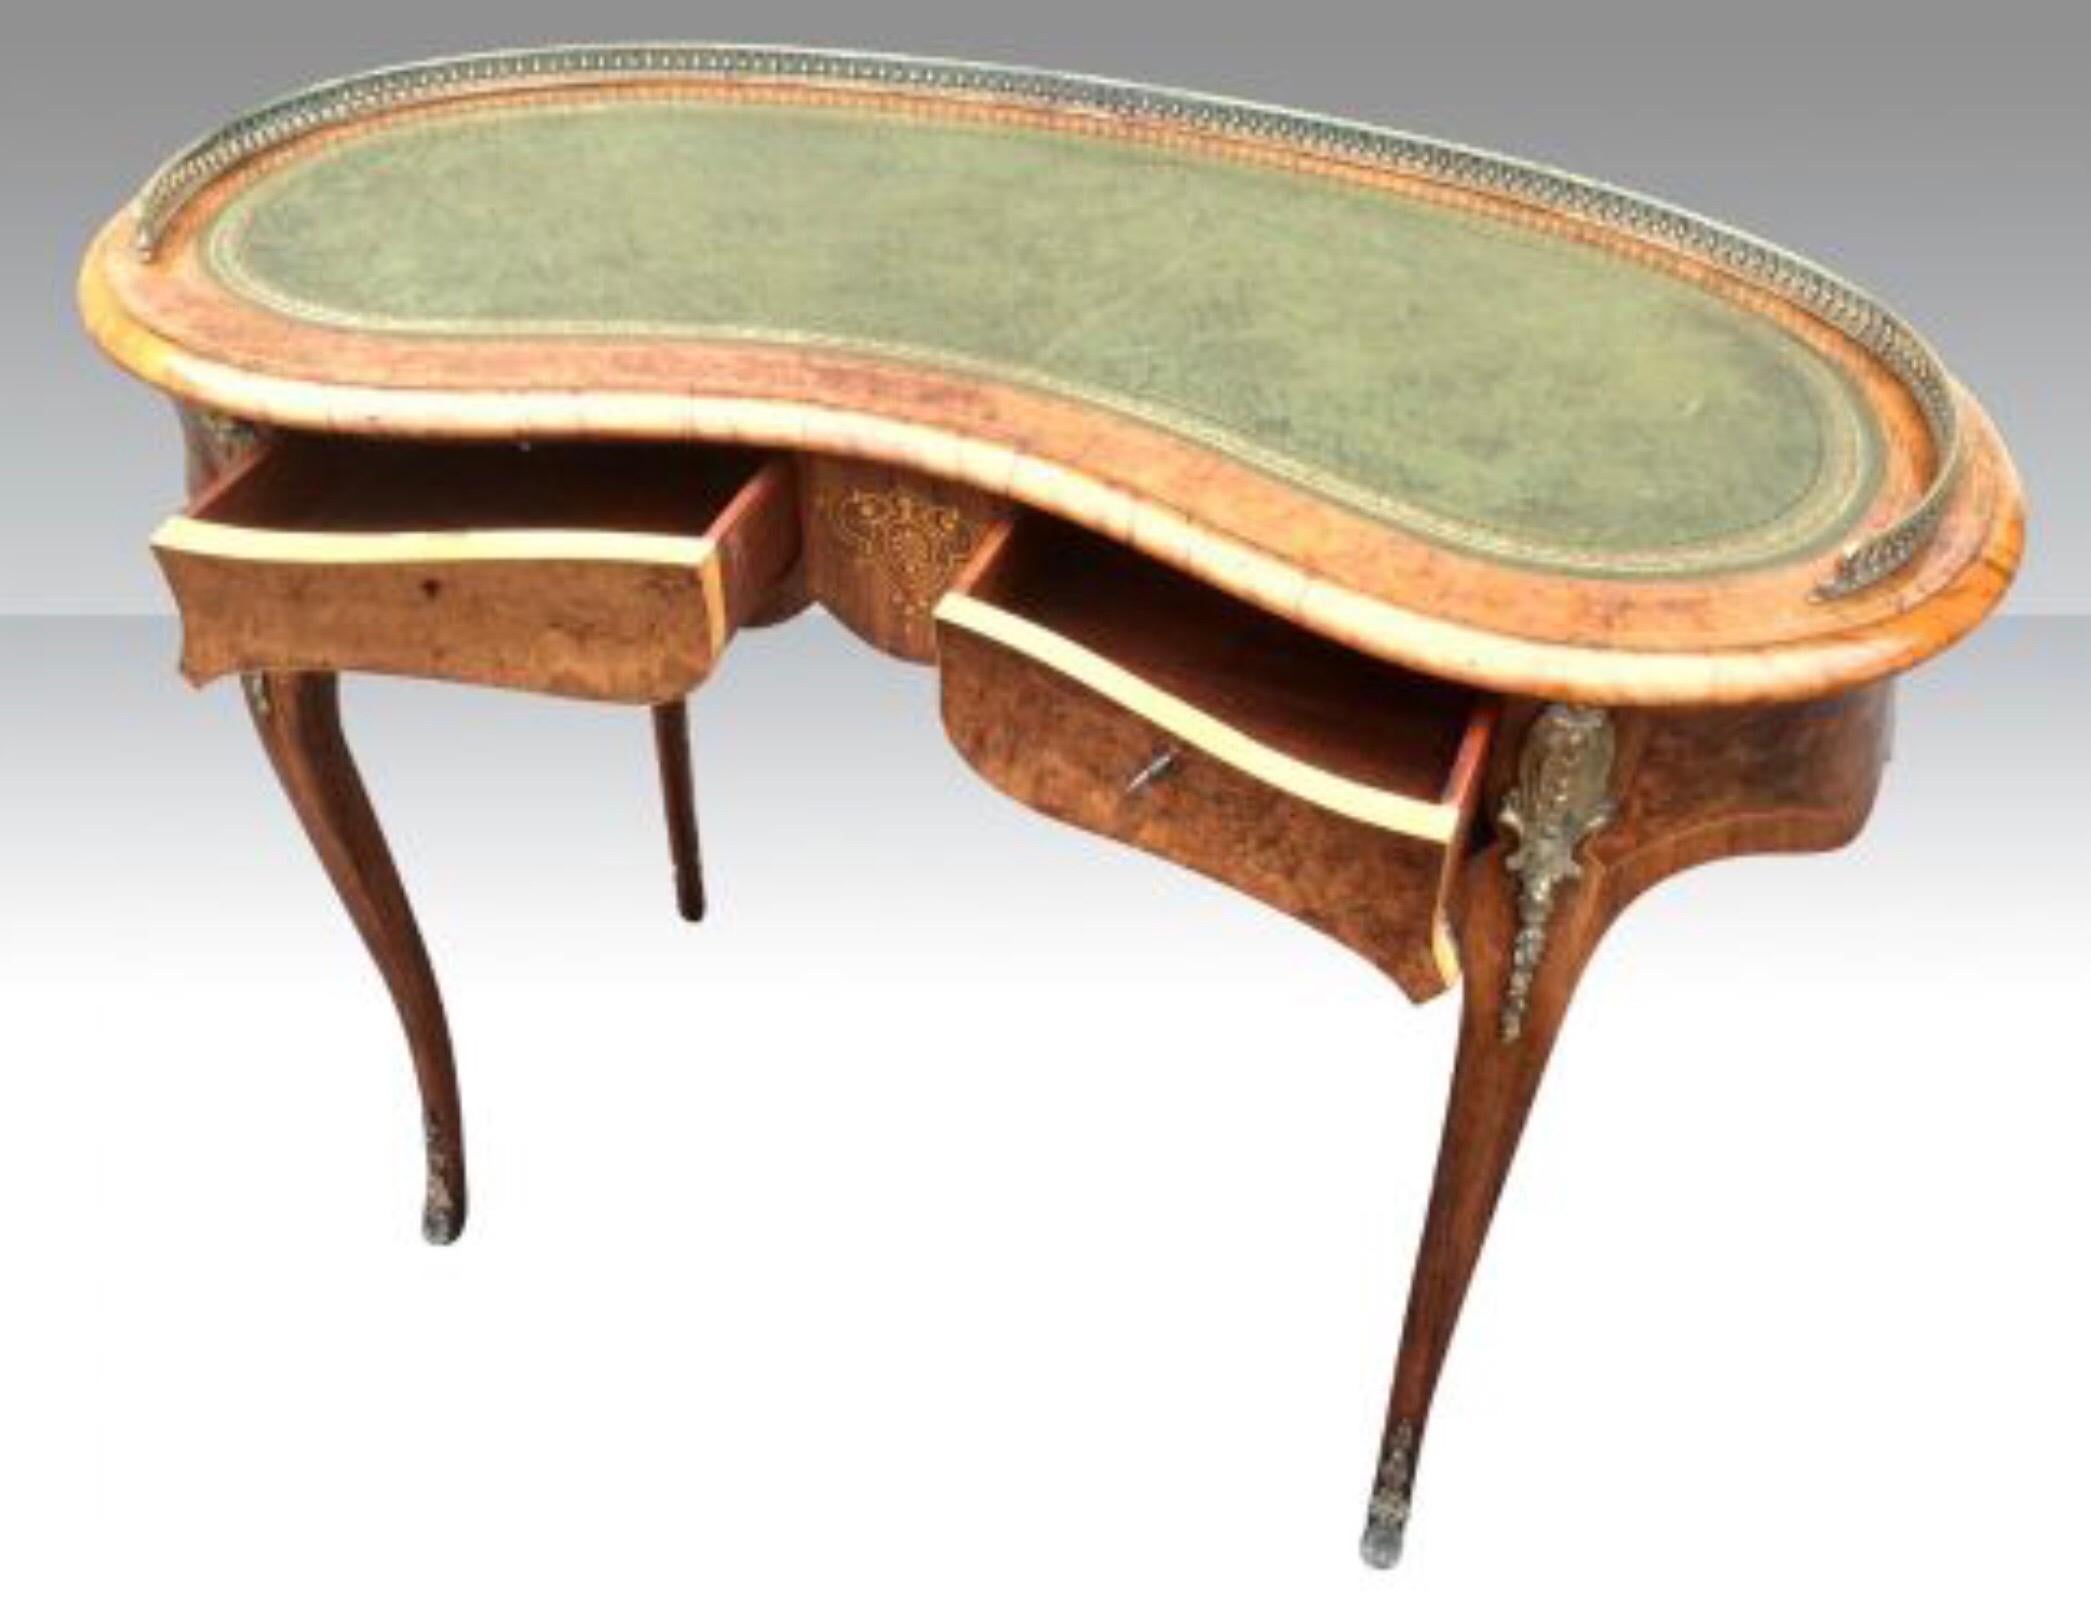 Walnut Ormolu Mounted Kidney Shaped Antique Desk In Excellent Condition For Sale In Antrim, GB